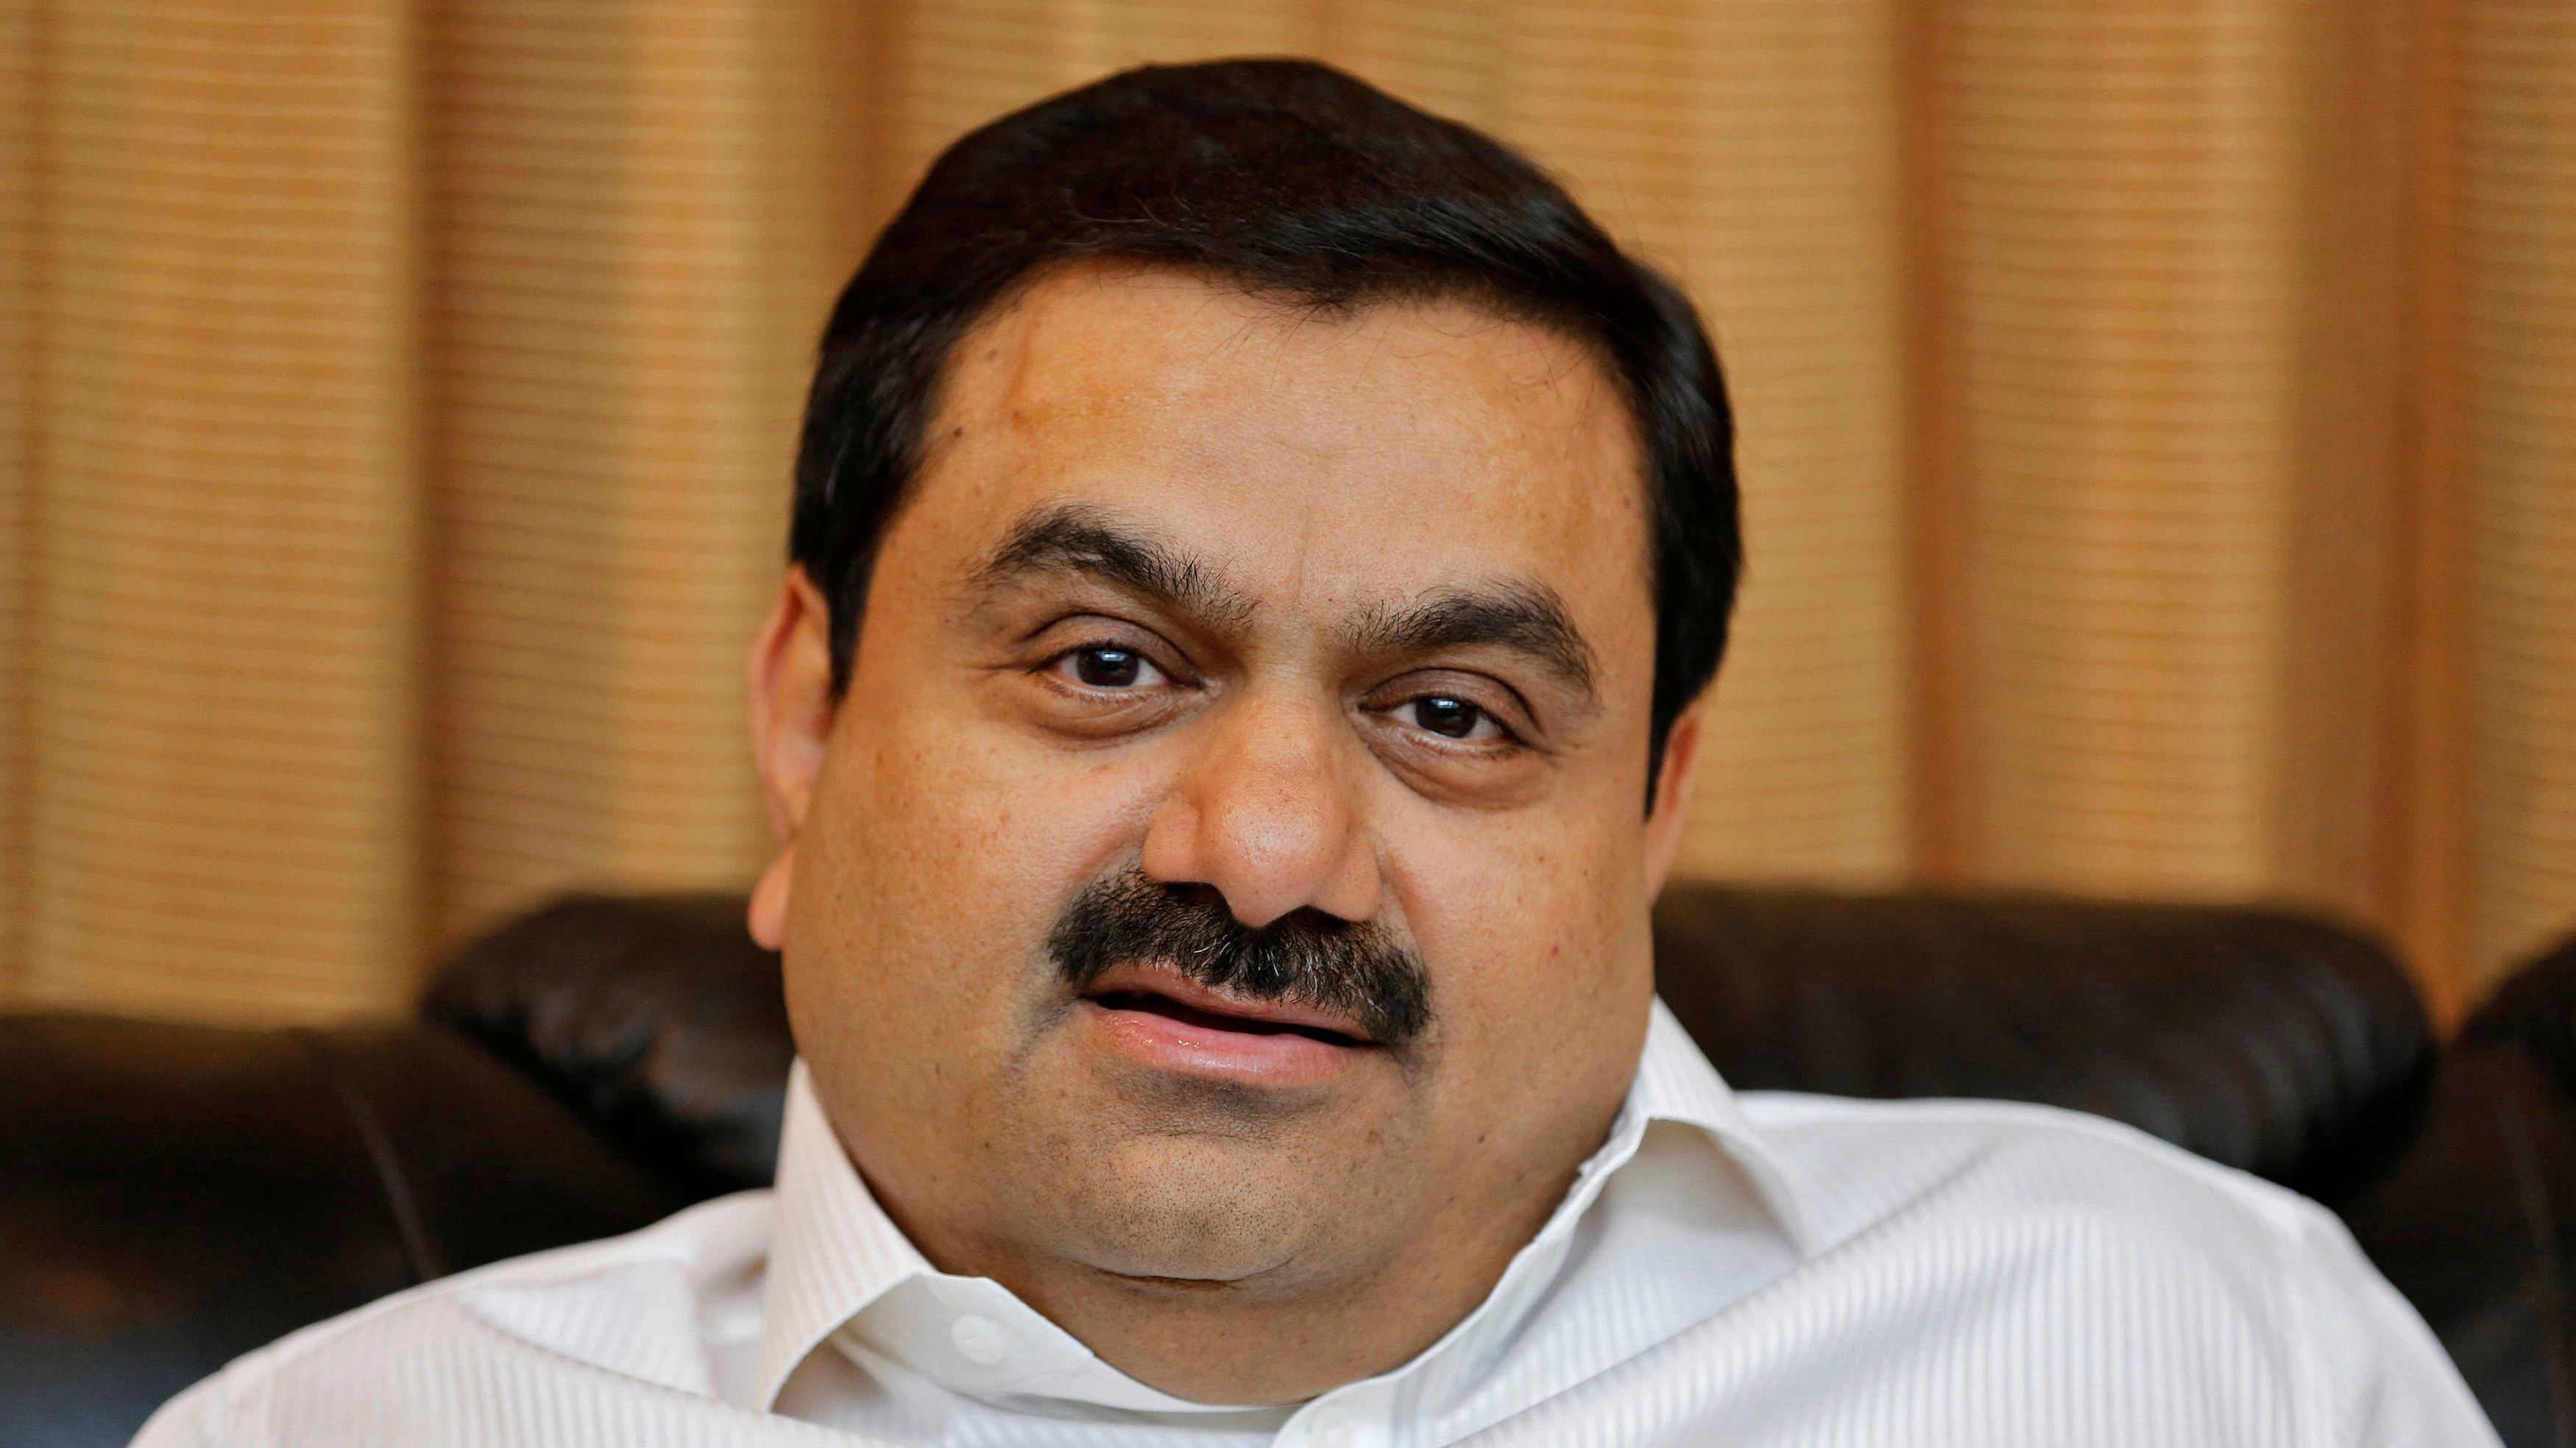 Gautam Adani, a first-generation entrepreneur whose net worth currently sits at $102 billion, according to Bloomberg’s Billionaires Index, has rapidly diversified into new areas like data centres, digital services, cement and media. Credit: Reuters File Photo